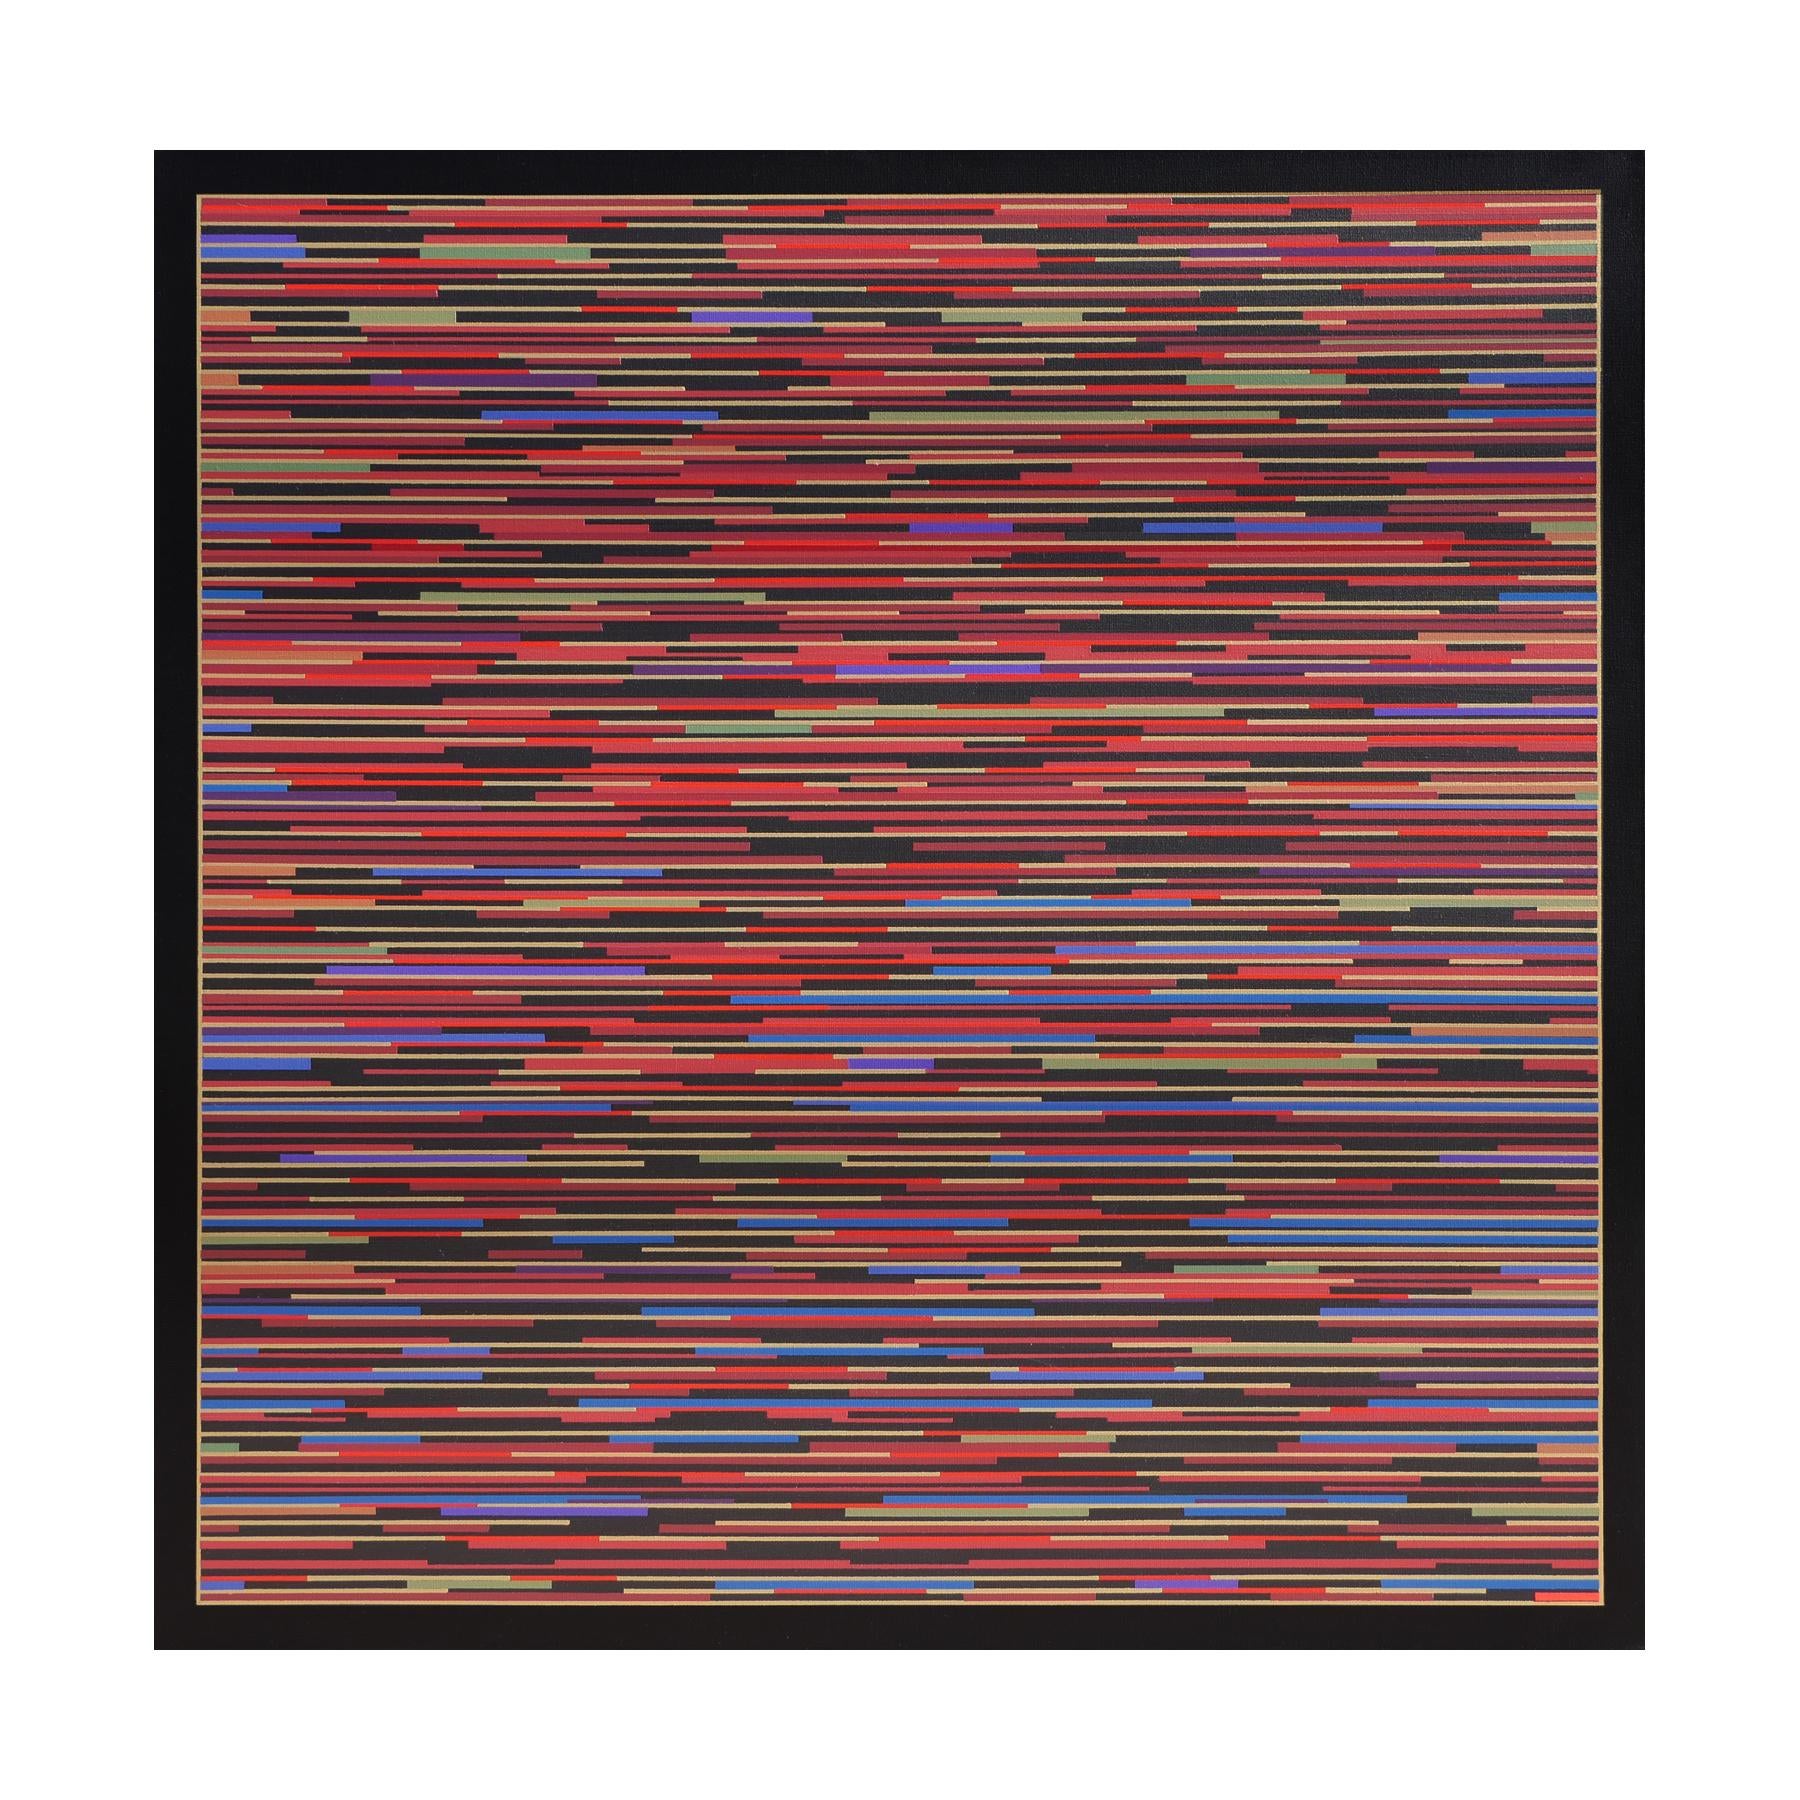 Contemporary abstract geometric painting by artist Mark Byckowski. The work is featured in a series of paintings. The work features horizontal lines with a variety of vivid colors of red, purple, green, and yellow, painted on a black background.